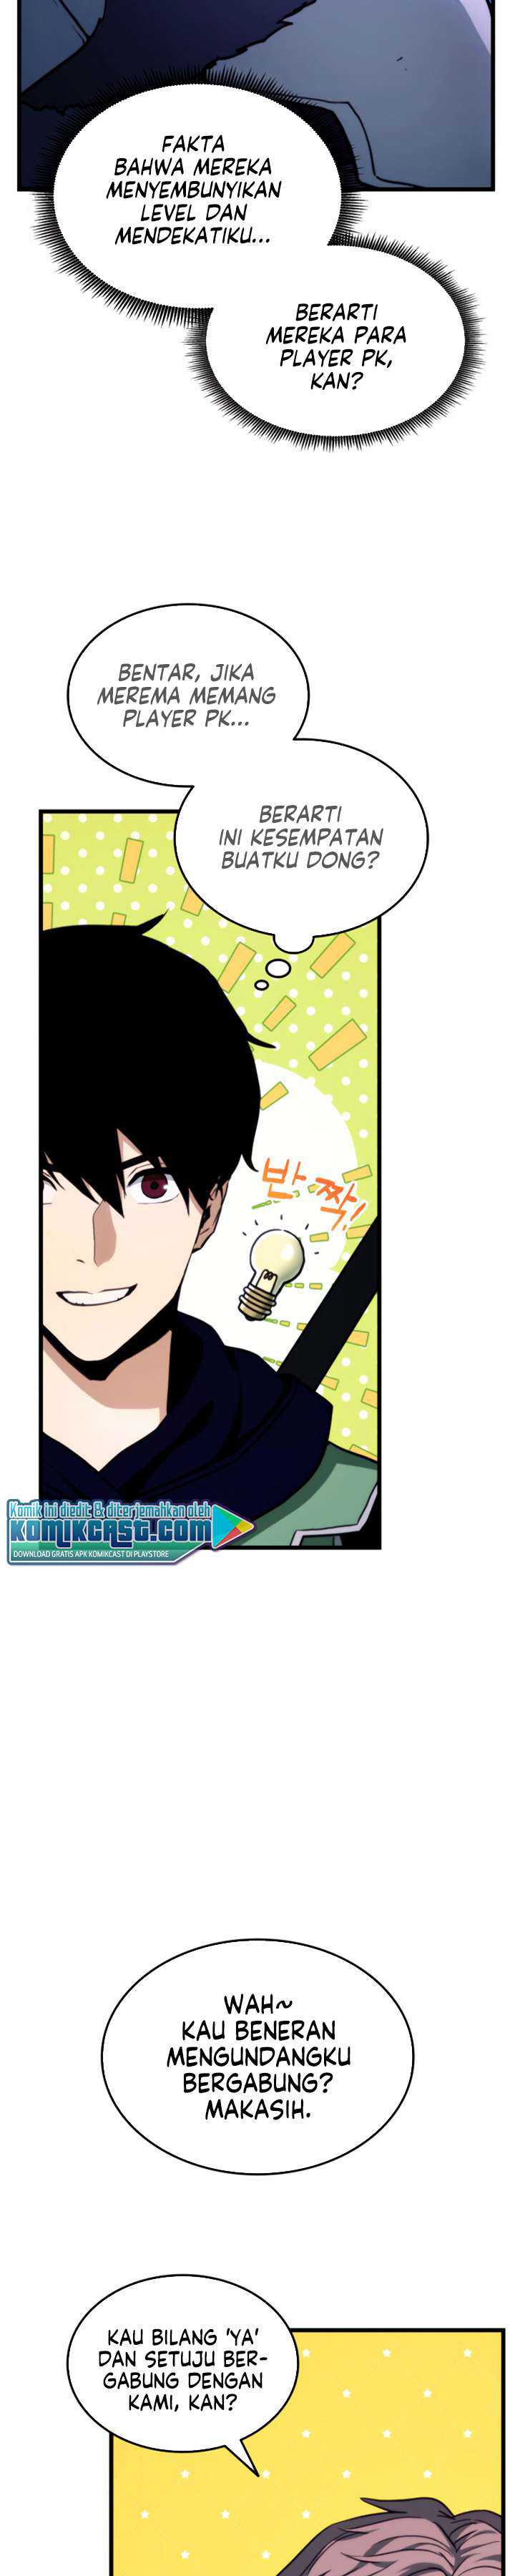 rankers-return-remake Chapter chapter-06